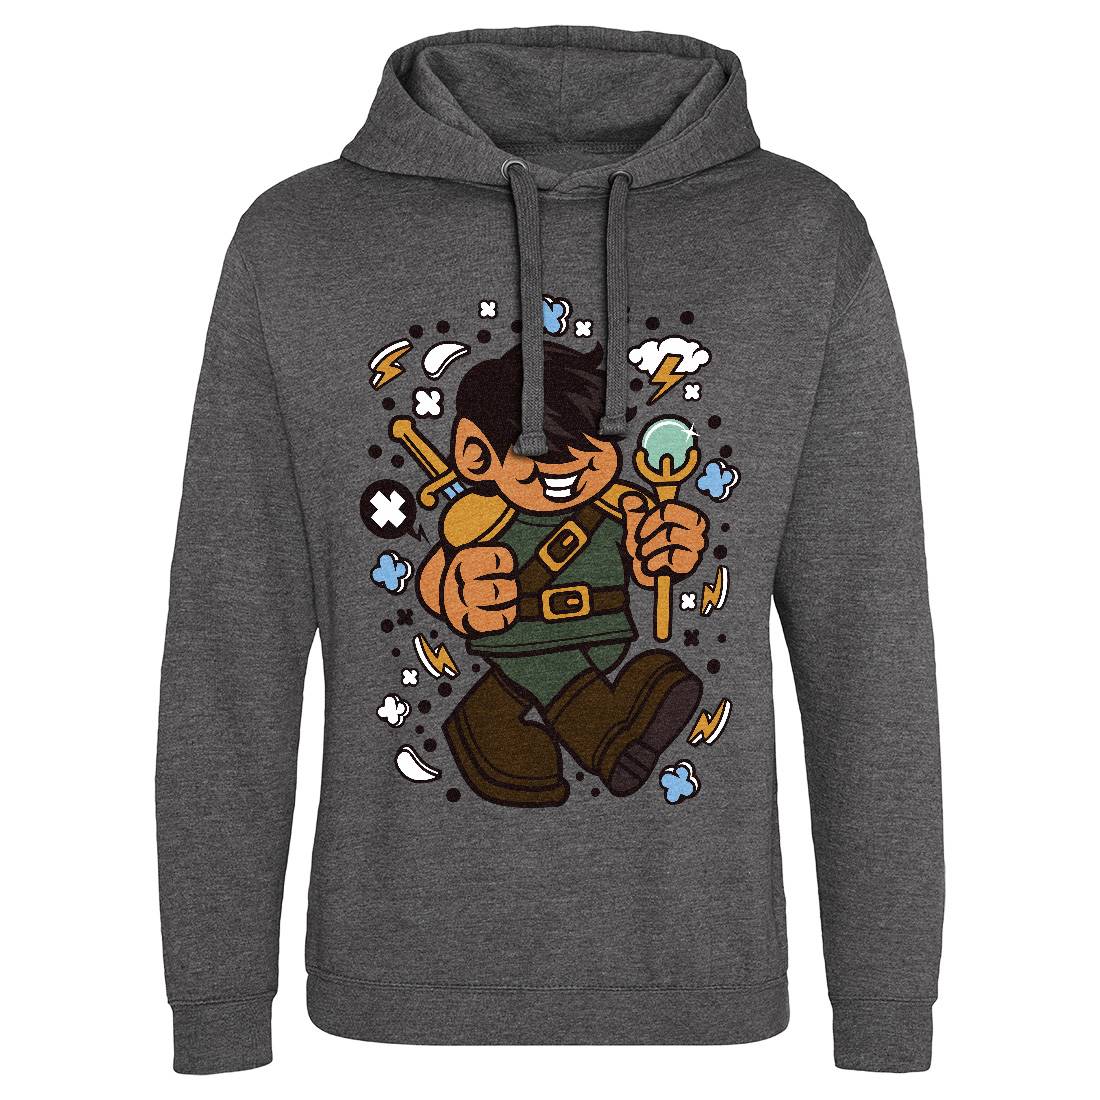 Knight Kid Mens Hoodie Without Pocket Warriors C575